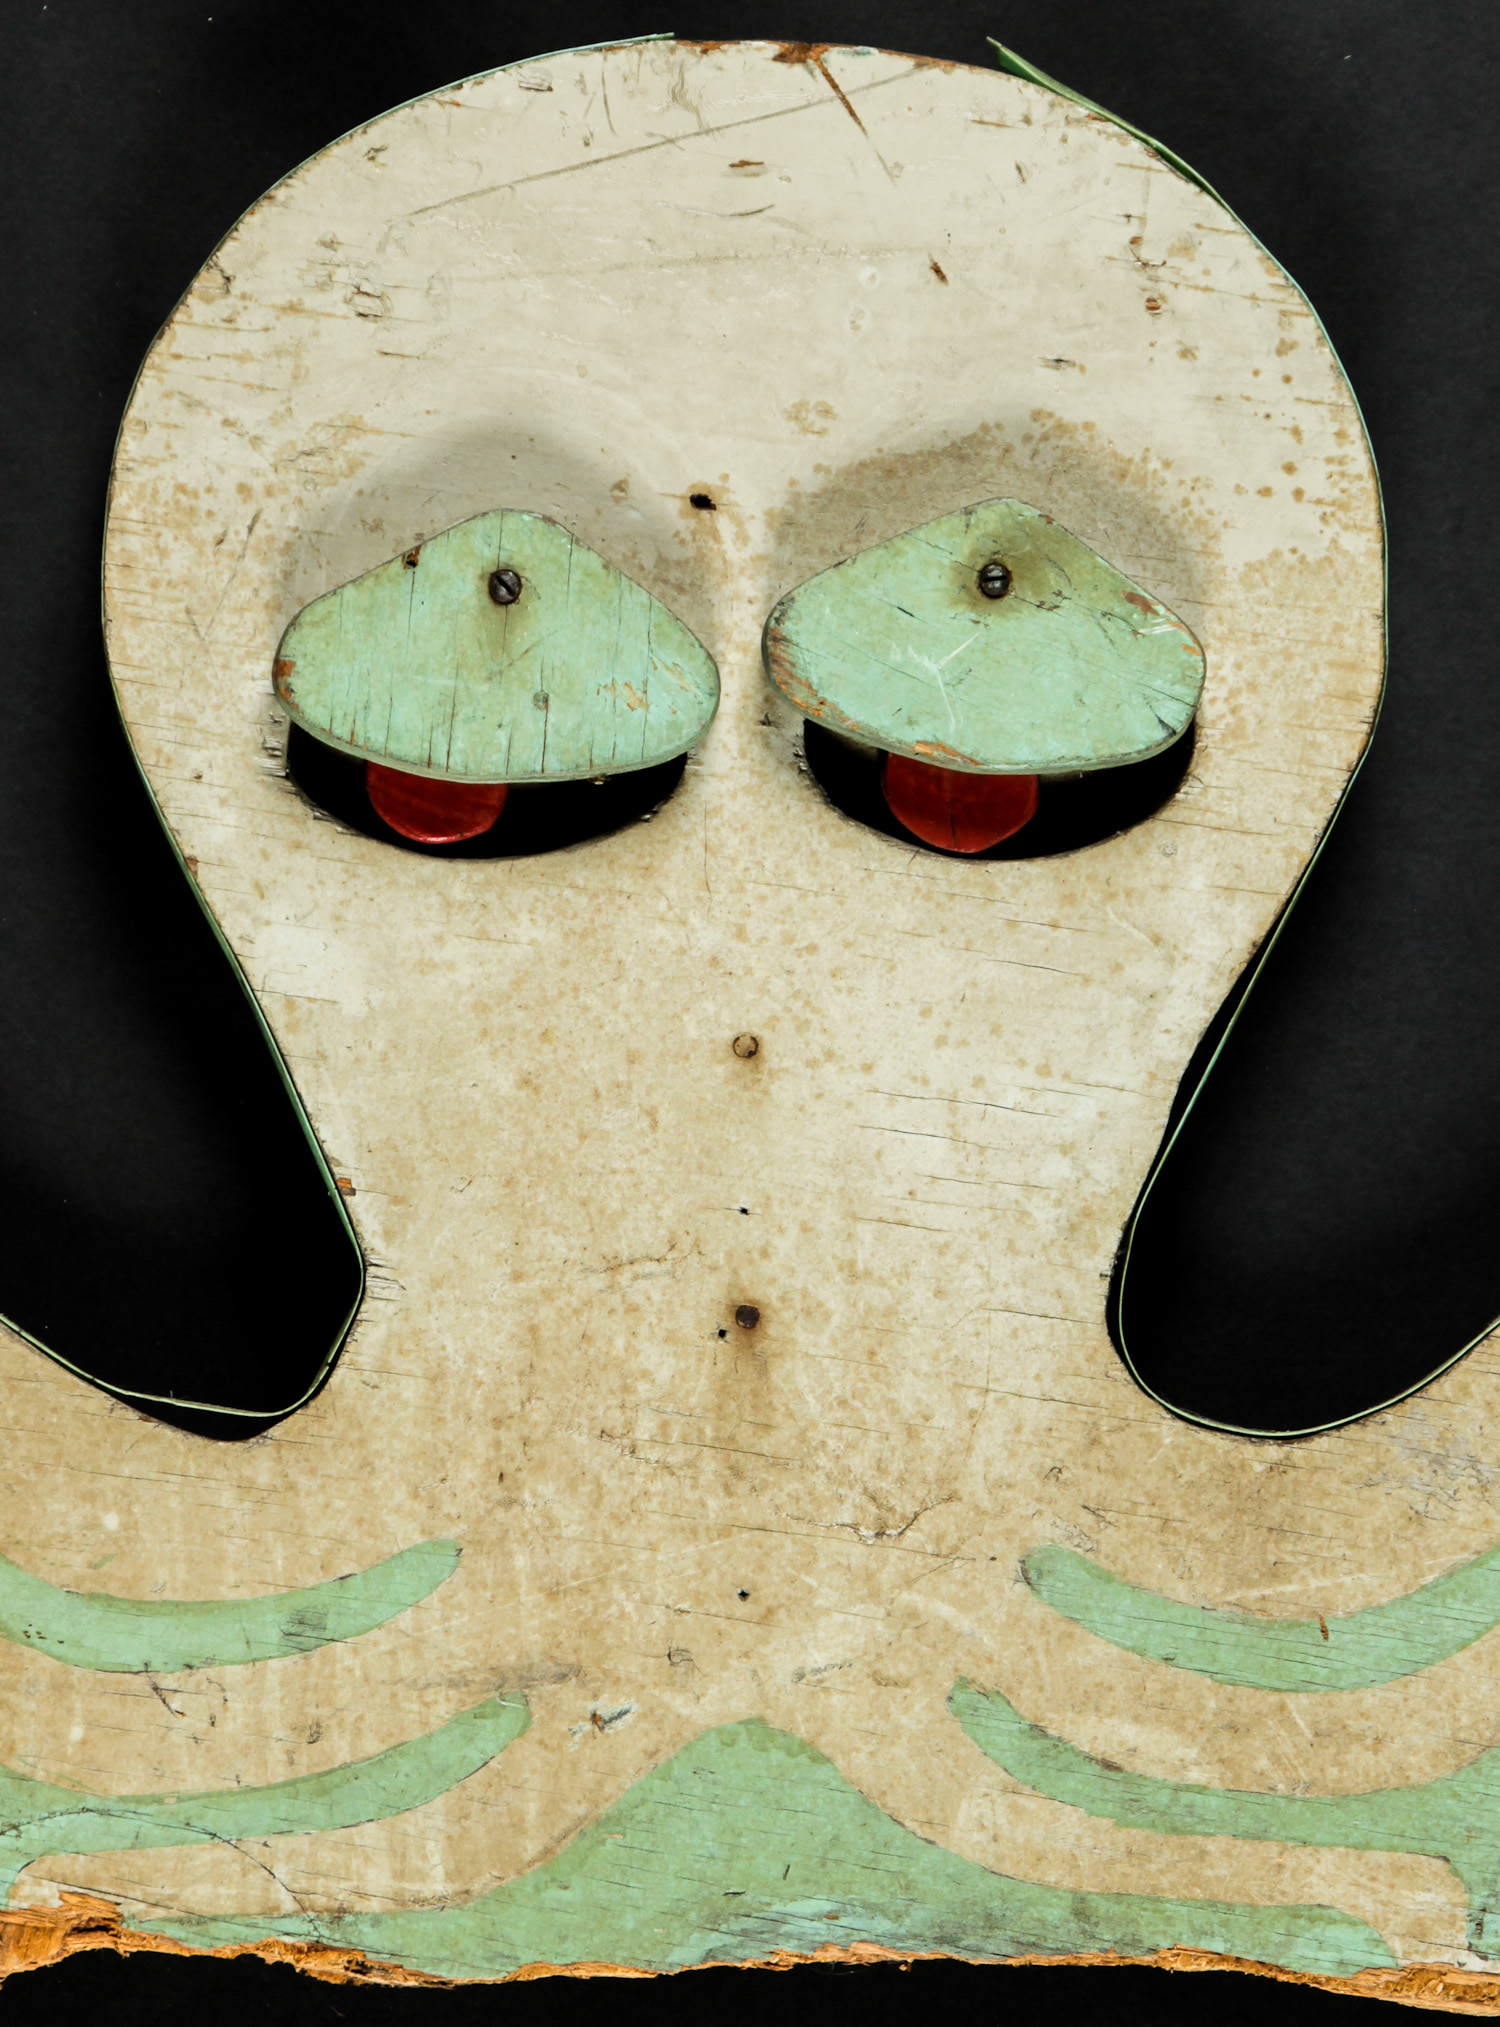 Pair Octopus Midway Ride Fascia Boards, Early/Mid 20th C. With kinetic pendulous eyelids. Original - Image 2 of 3